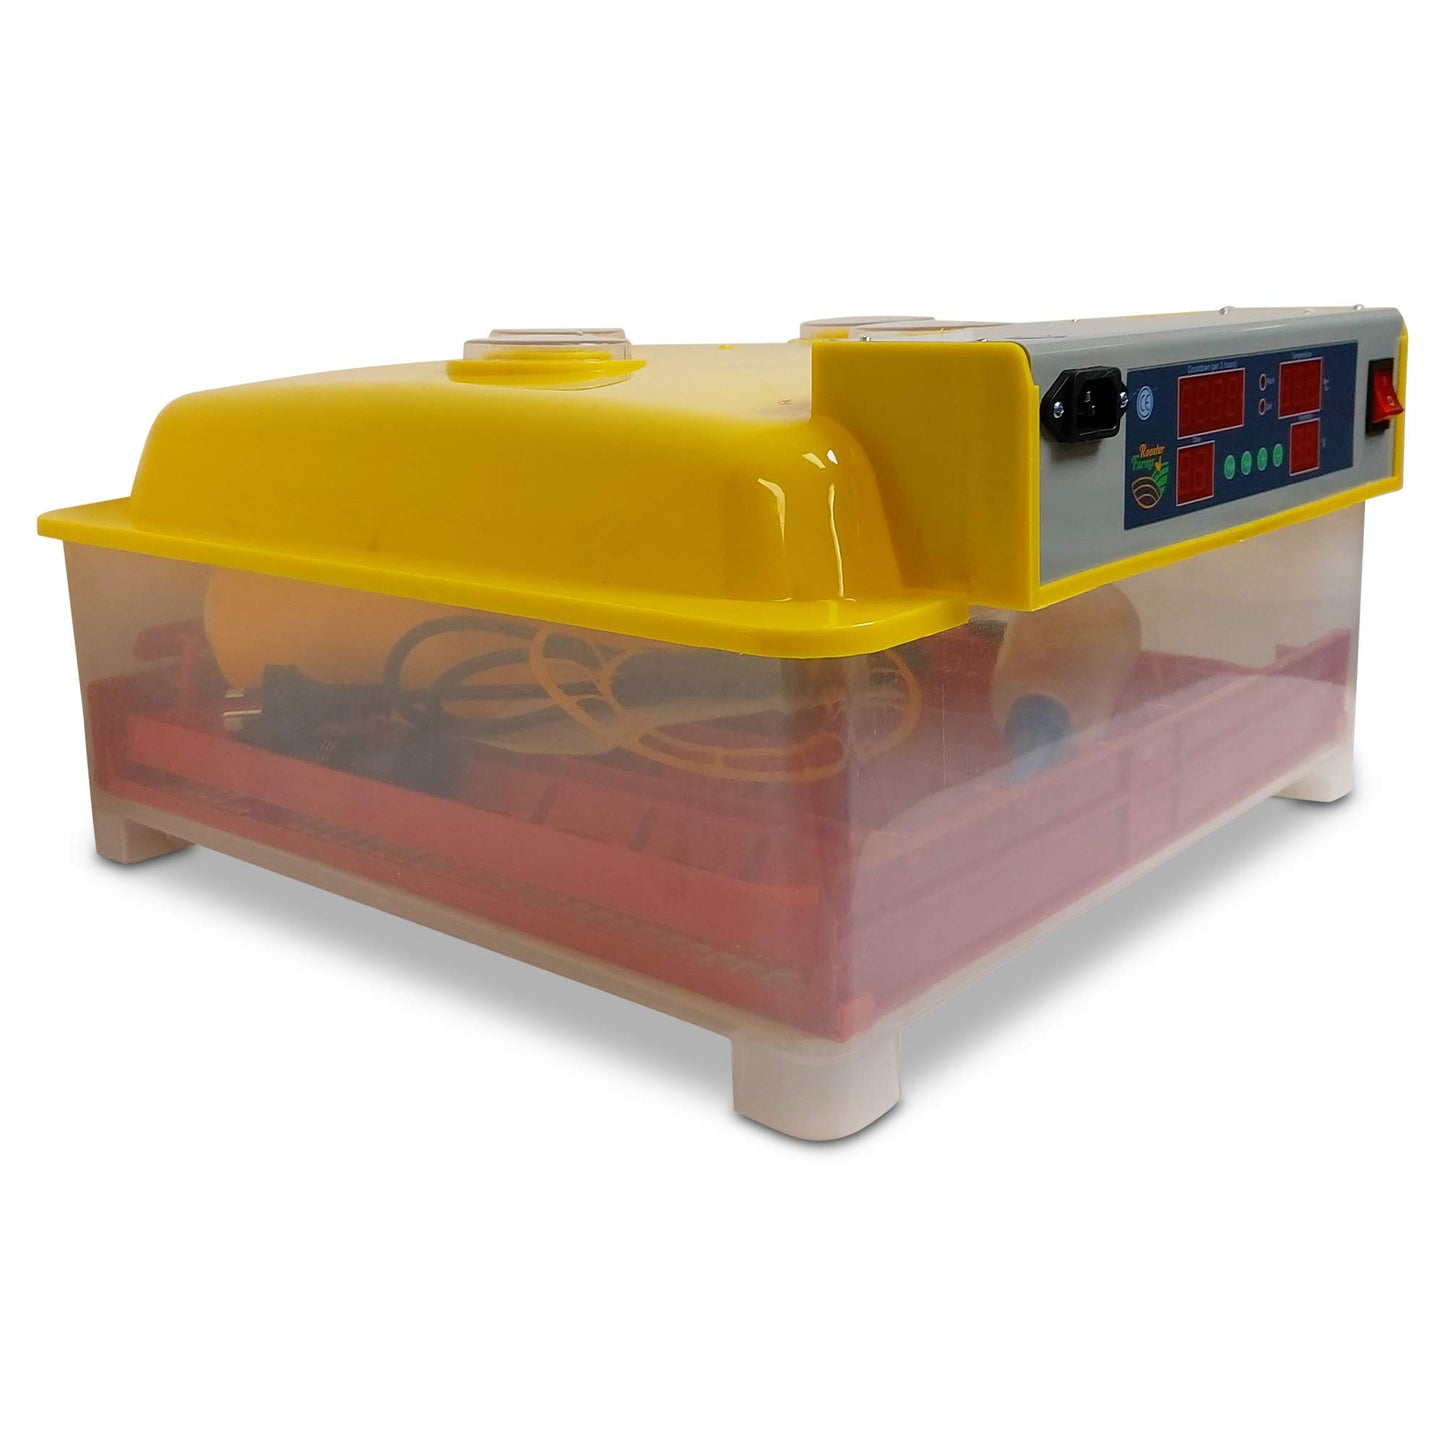 Electric 60 Egg Incubator + Accessories Hatching Eggs Chicken Quail Duck